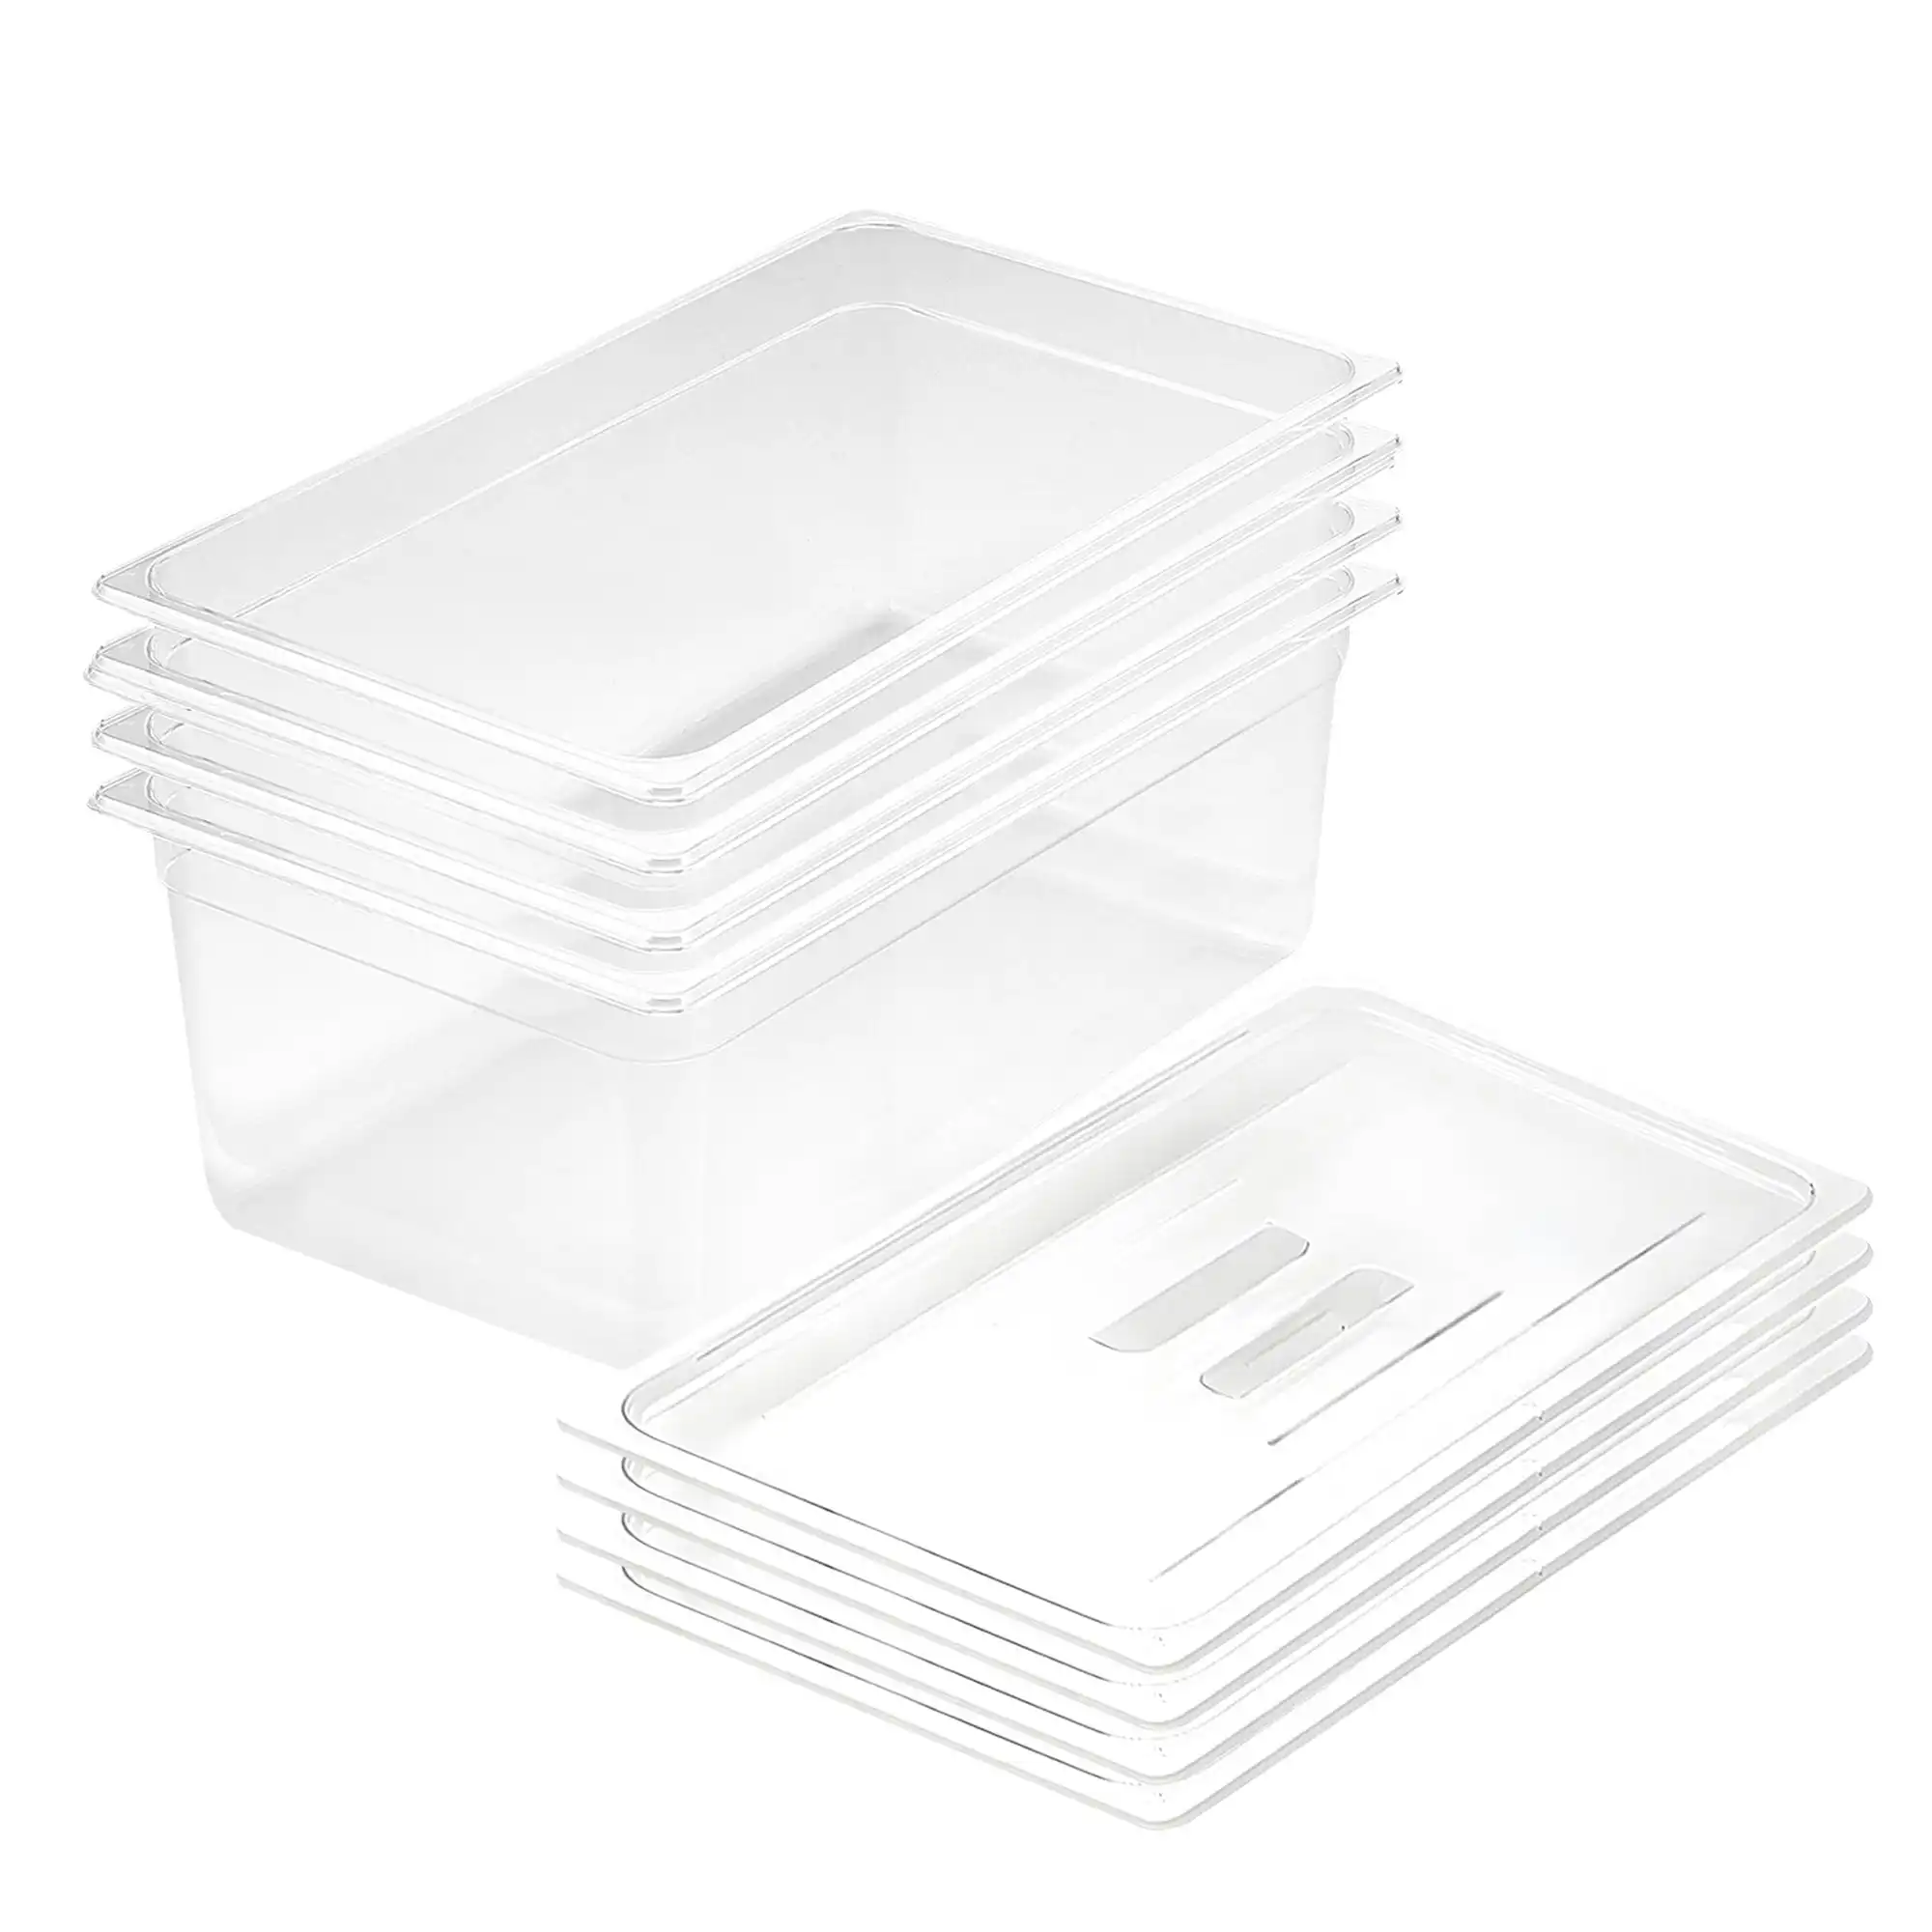 Soga 200mm Clear Gastronorm GN Pan 1/1 Food Tray Storage Bundle of 4 with Lid